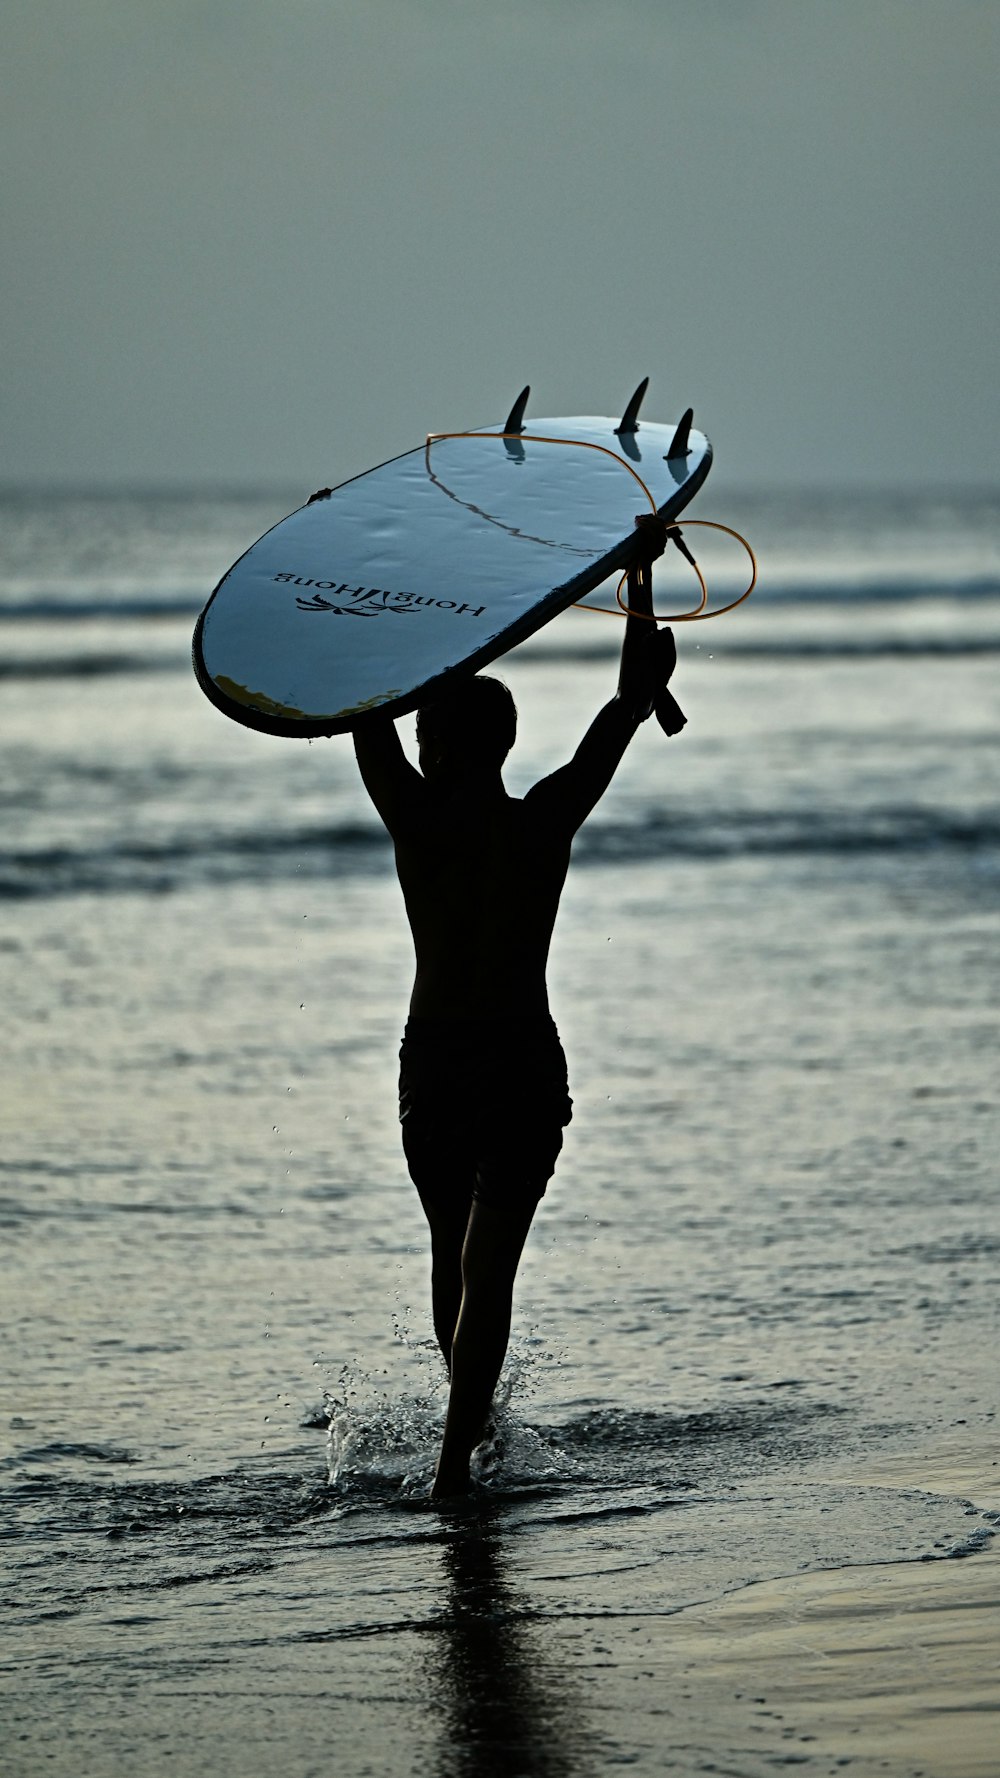 a man carrying a surfboard into the ocean